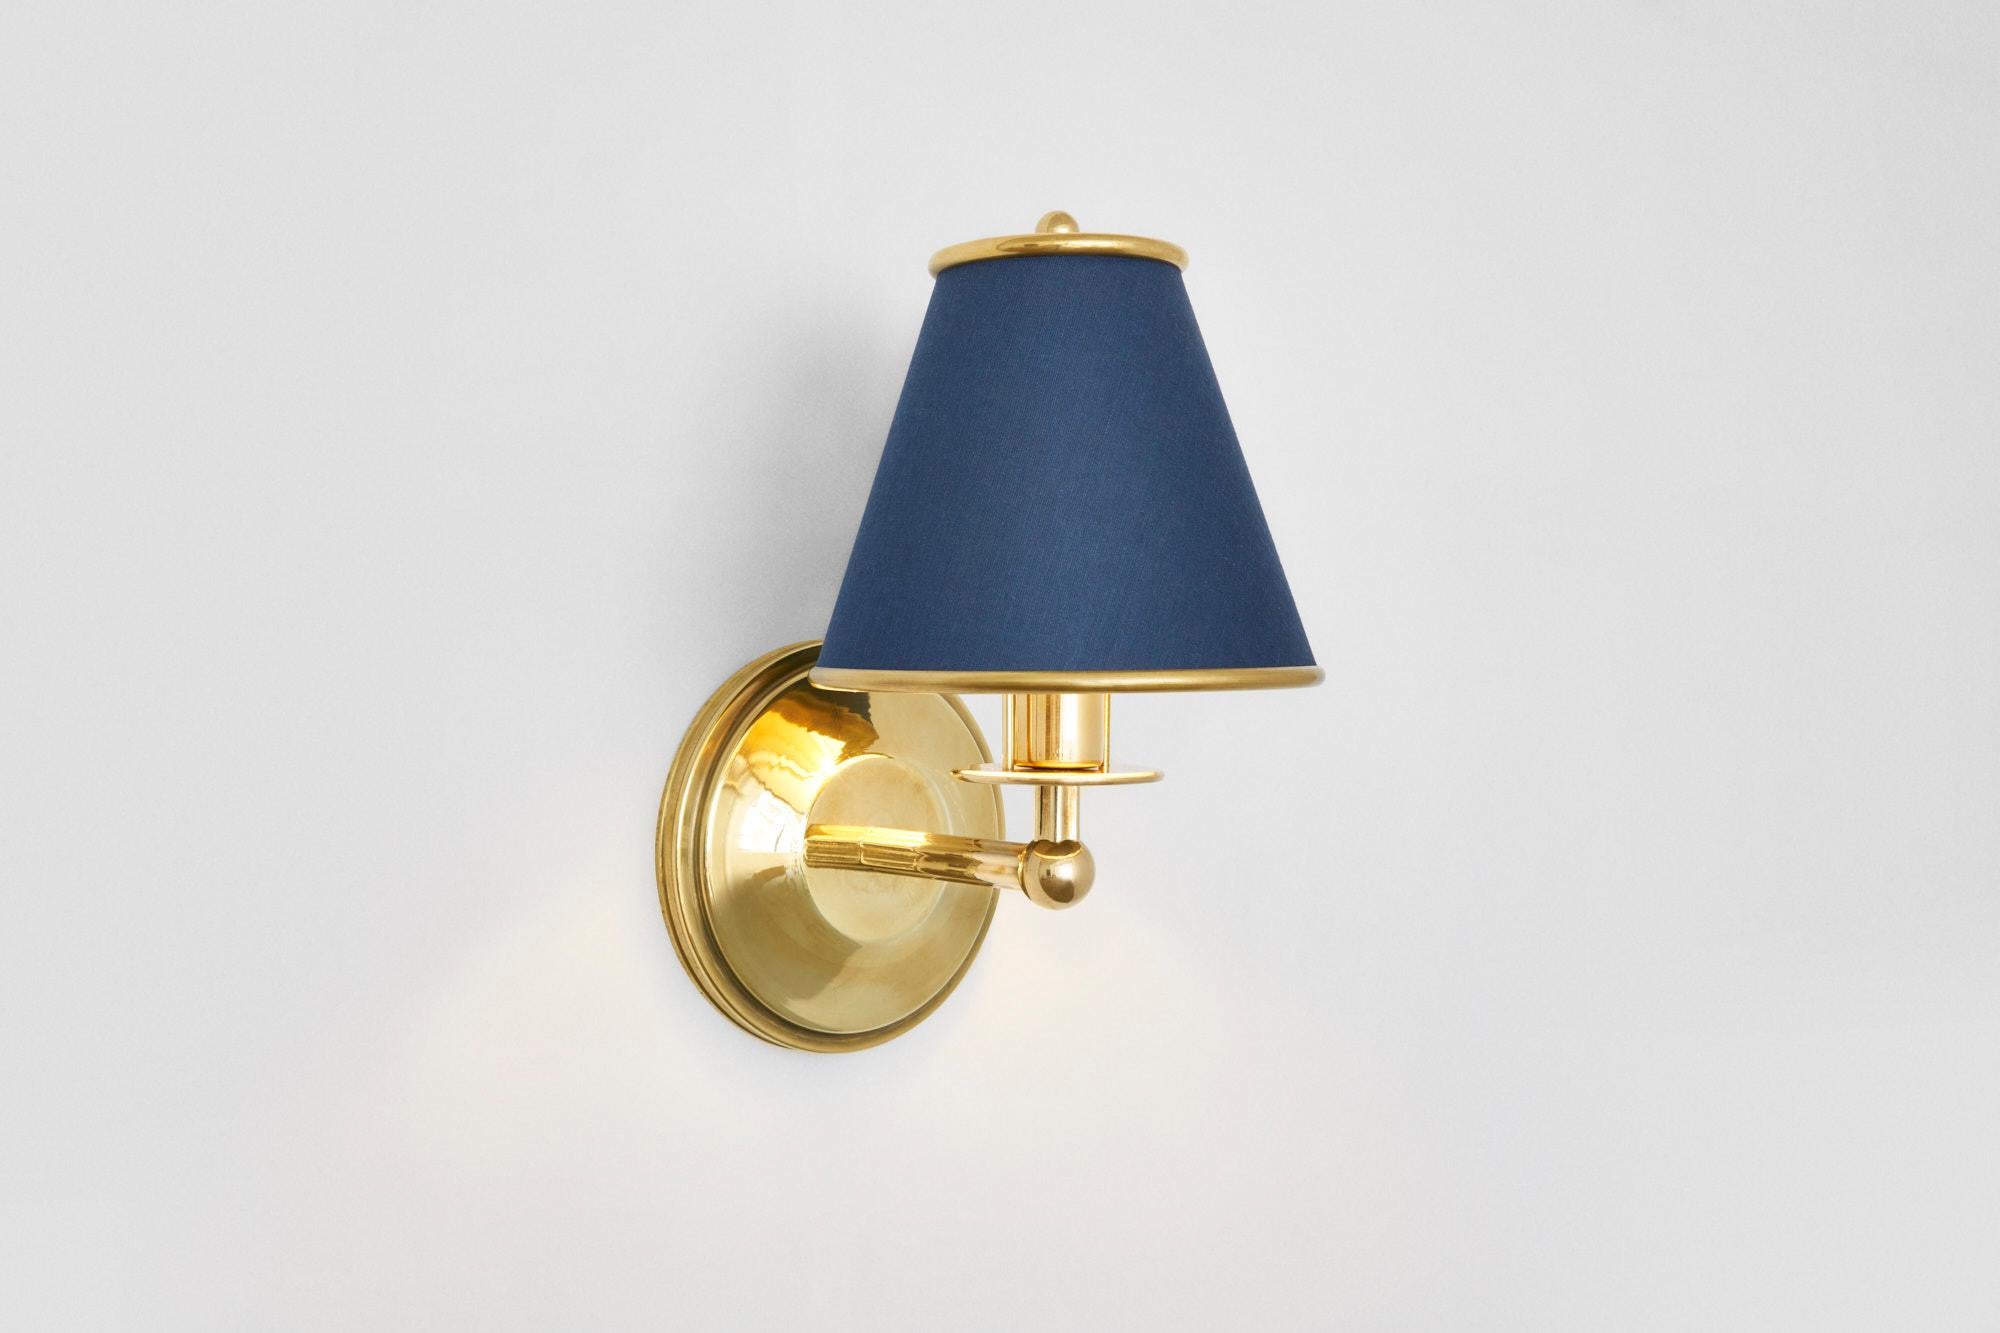 Materials
Metal: Brushed brass, blackened brass, antique brass, bronze, brushed nickel
Shade: navy, burgundy, or COM

Measurements: 5.75 W x 7 D x 9.75 H inches
Illumination
LED E-12 candelabra bulb

Notes:
Custom options : finish
Price